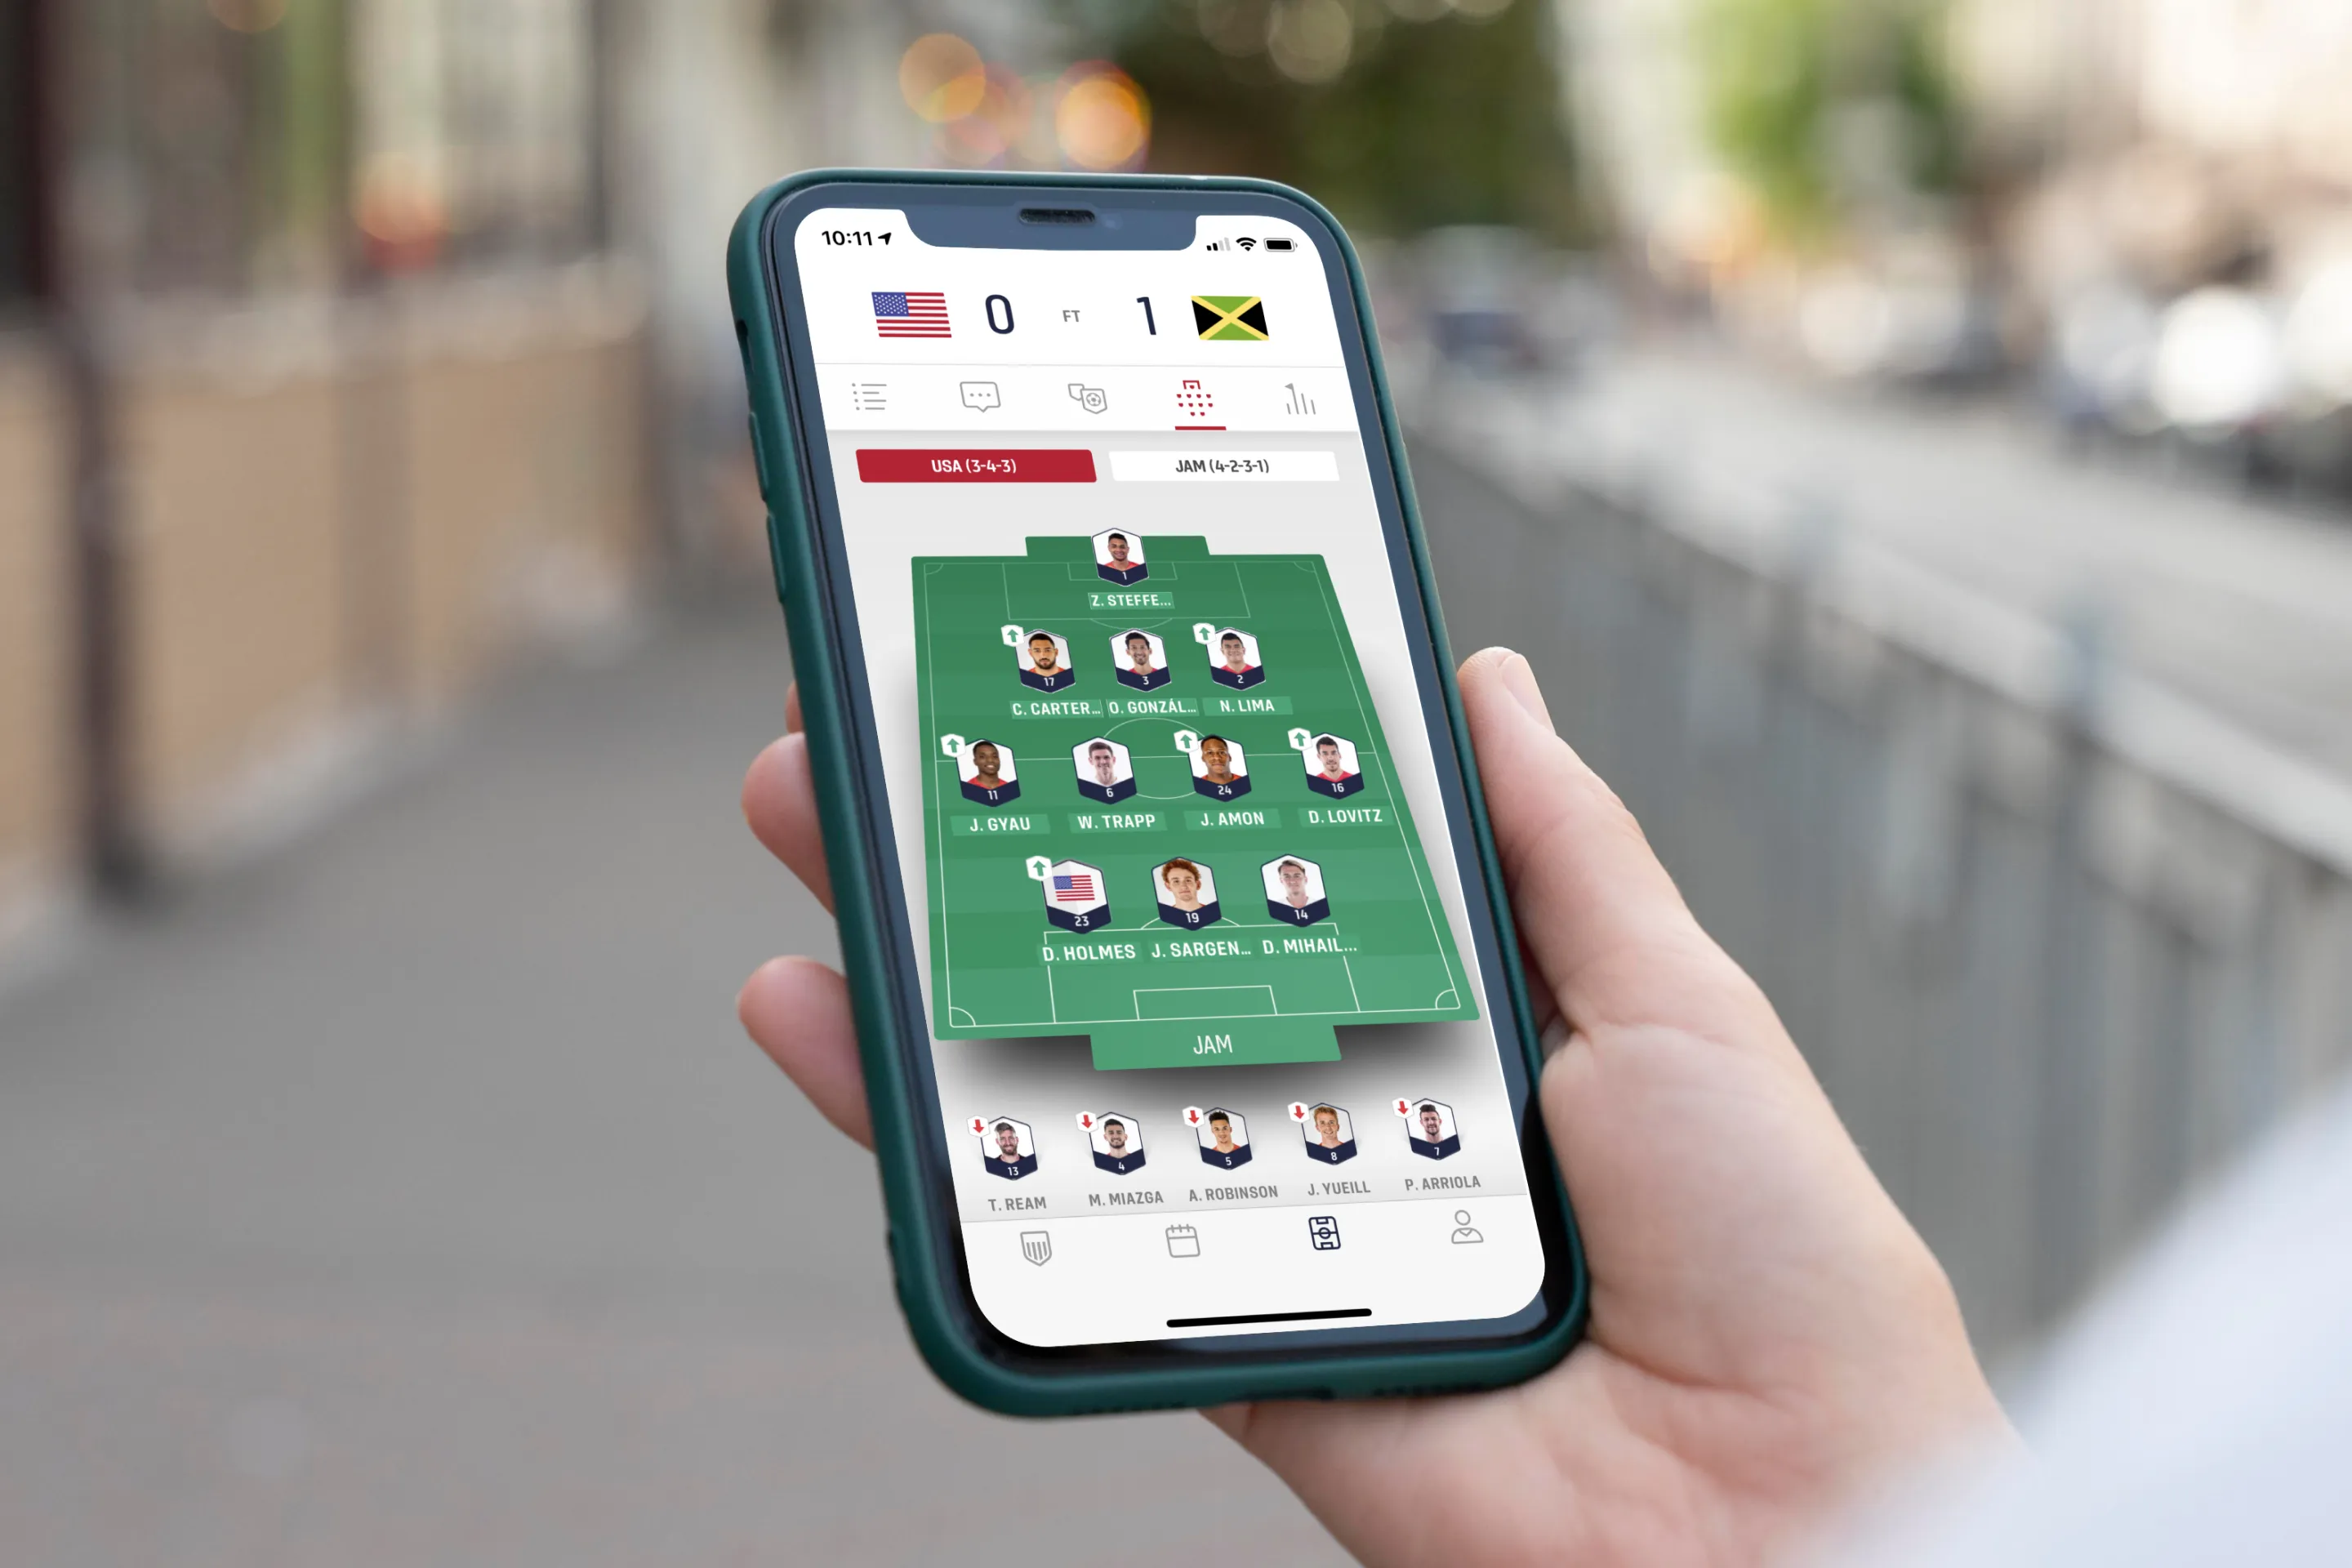 Person holding a phone with the US Soccer app showing the line-up screen showing players’ positions on the pitch